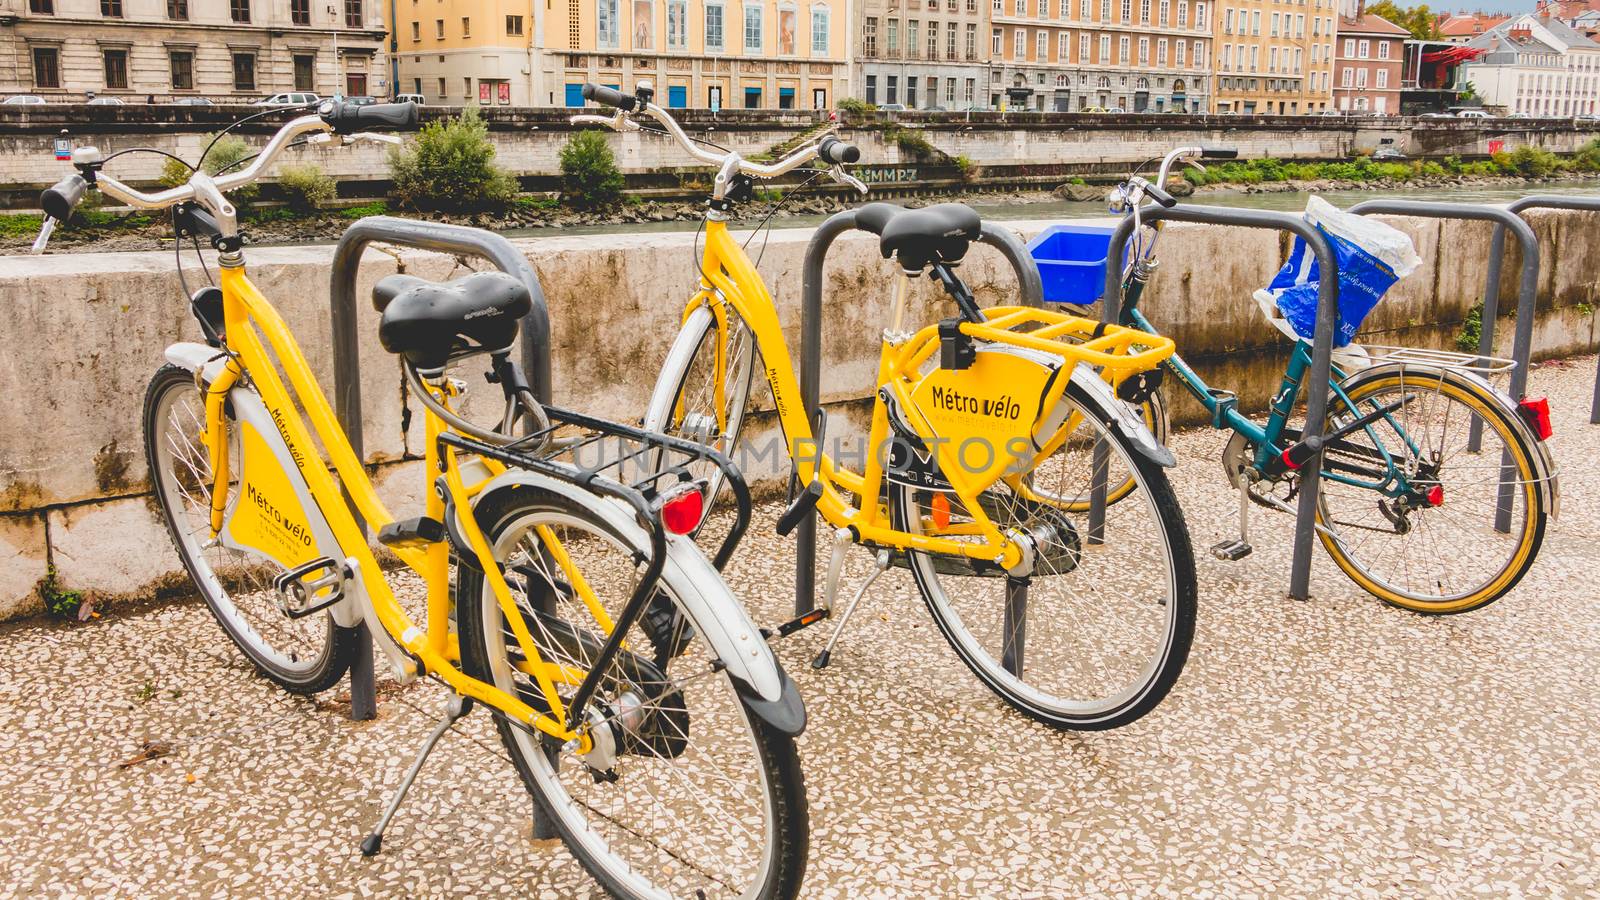 Shared bikes are lined up in the streets of Grenoble by AtlanticEUROSTOXX